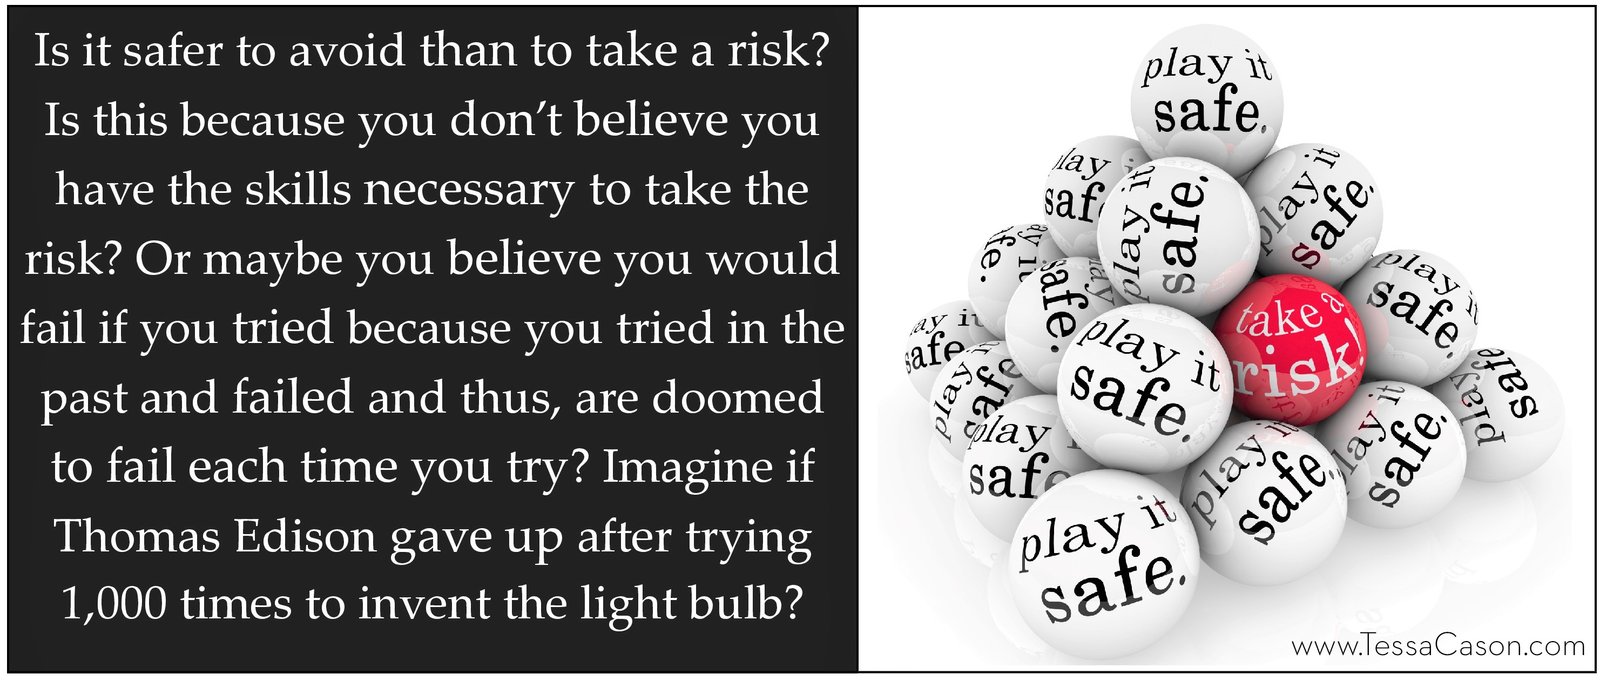 Is it safer to avoid than to take a risk